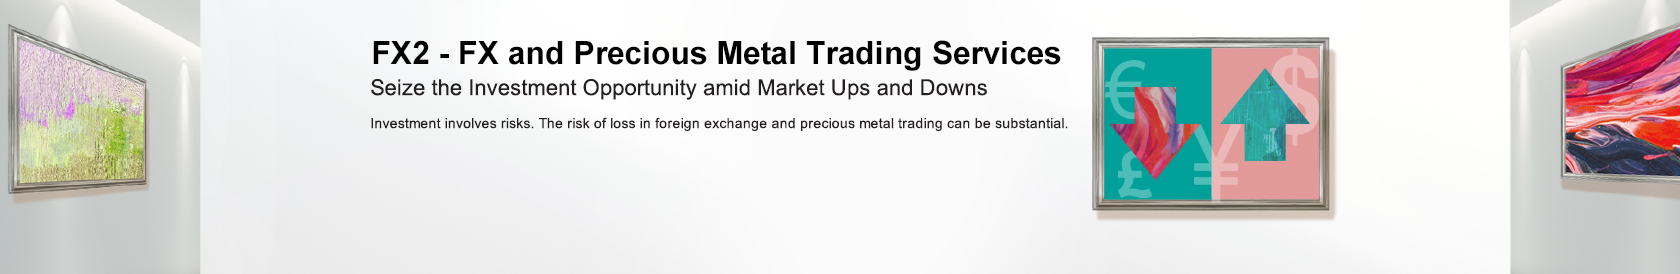 FX2 - FX and Precious Metal Trading Services  Investment involves risks.